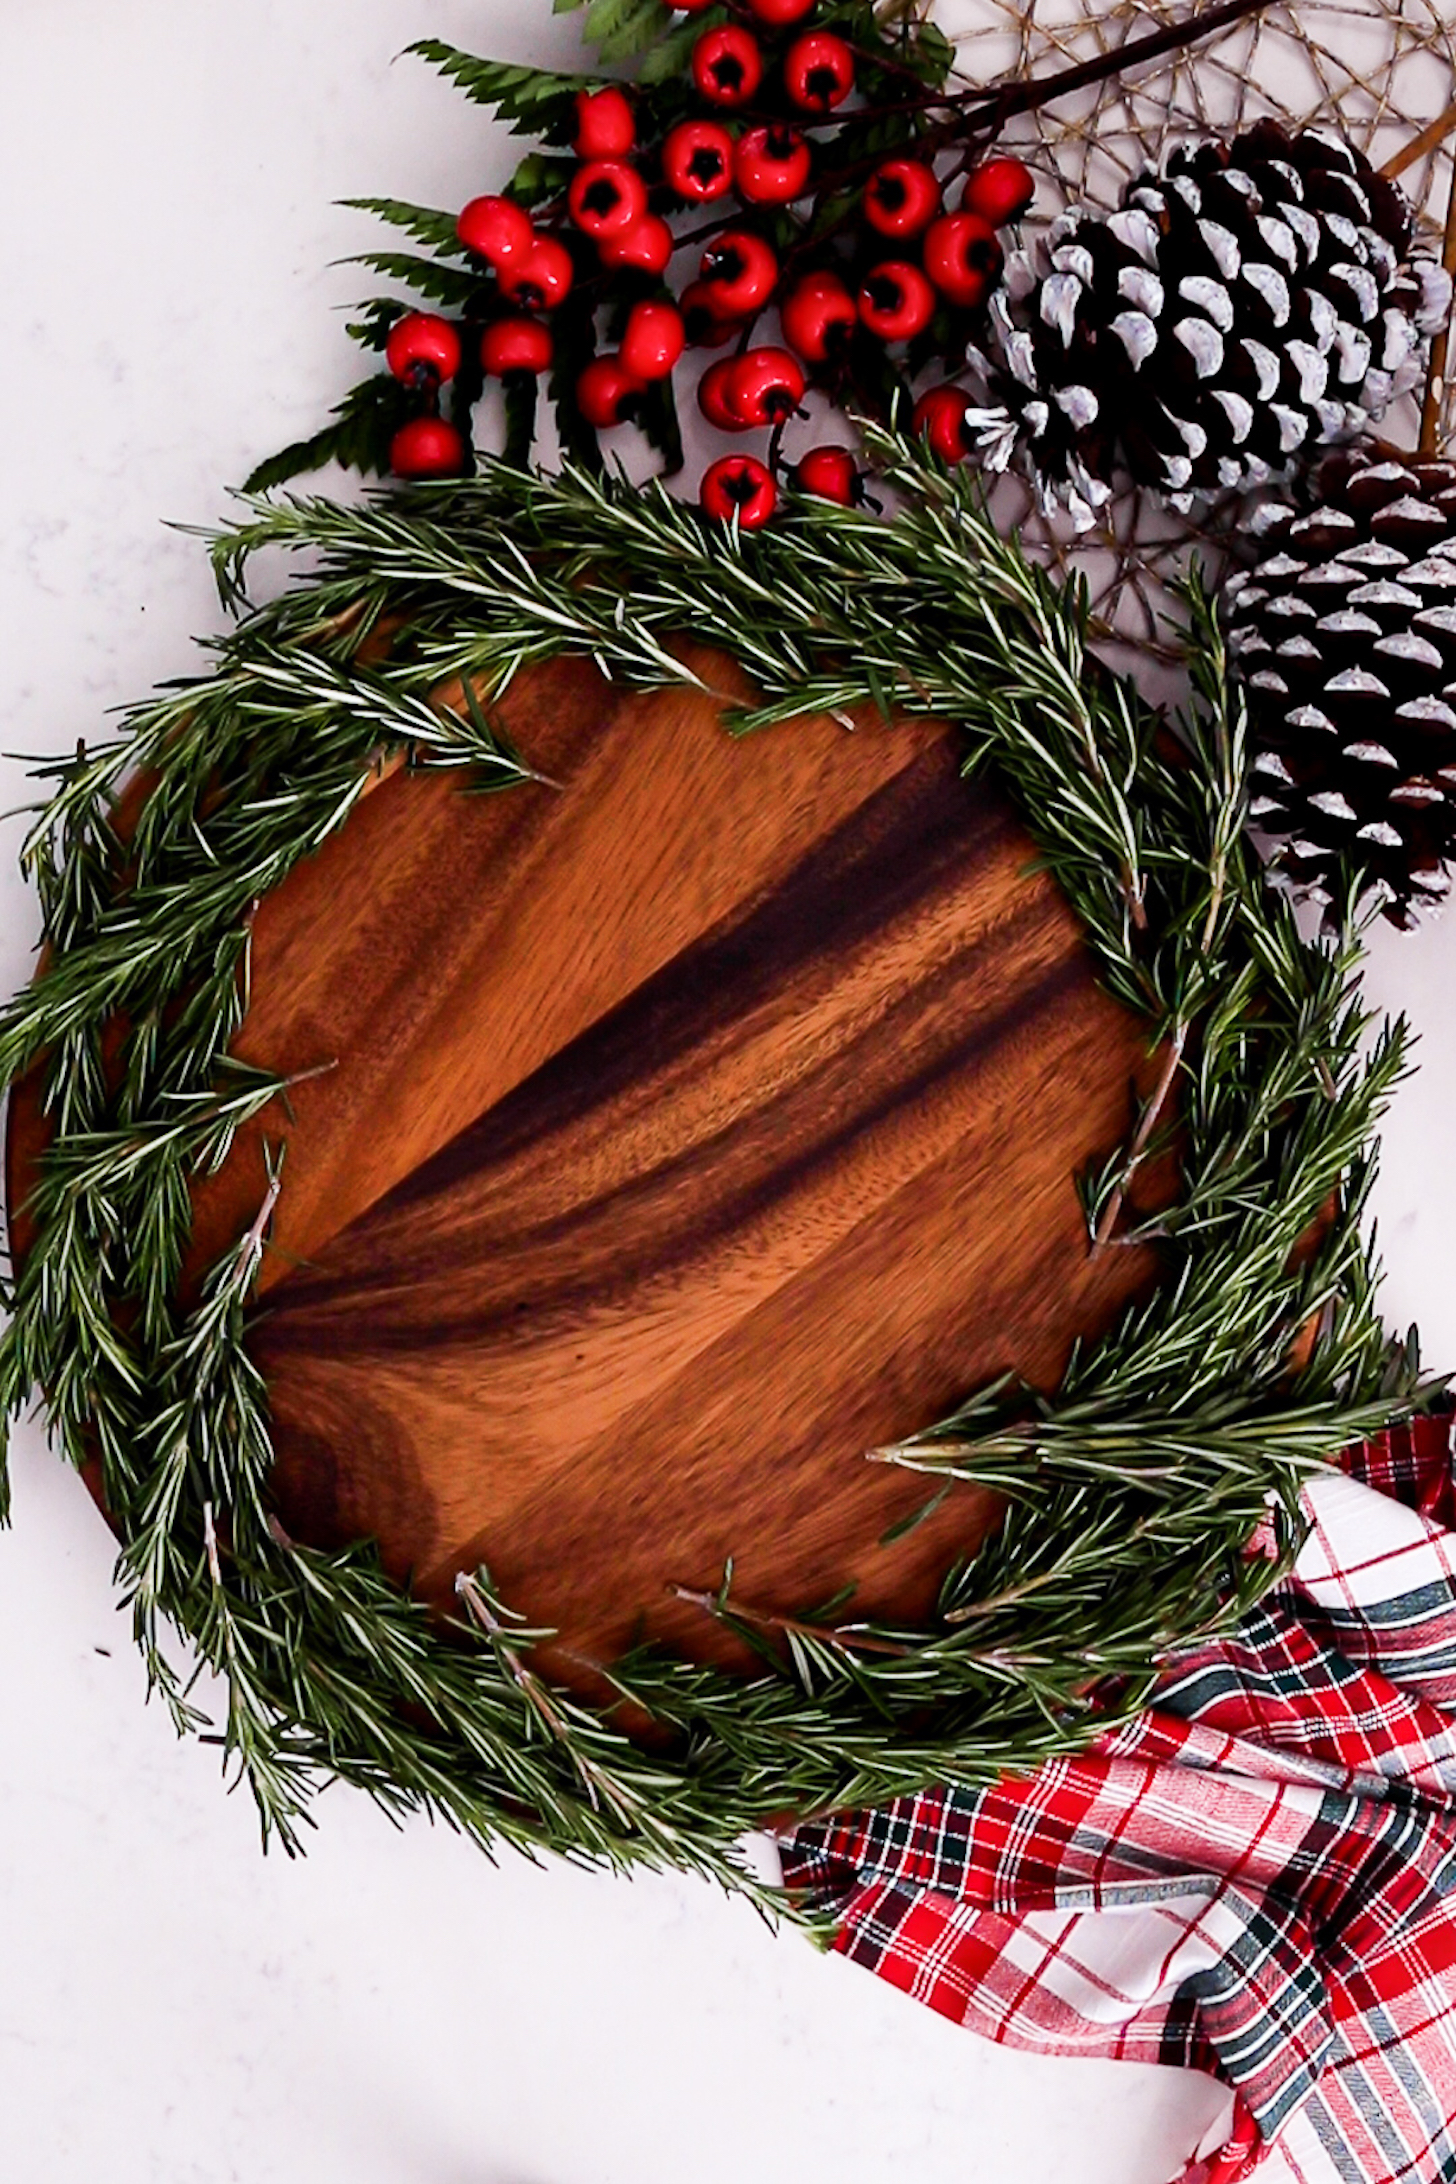 On a lazy Susan, a thick layer of fresh rosemary lines the edge, surrounded by festive decorations.